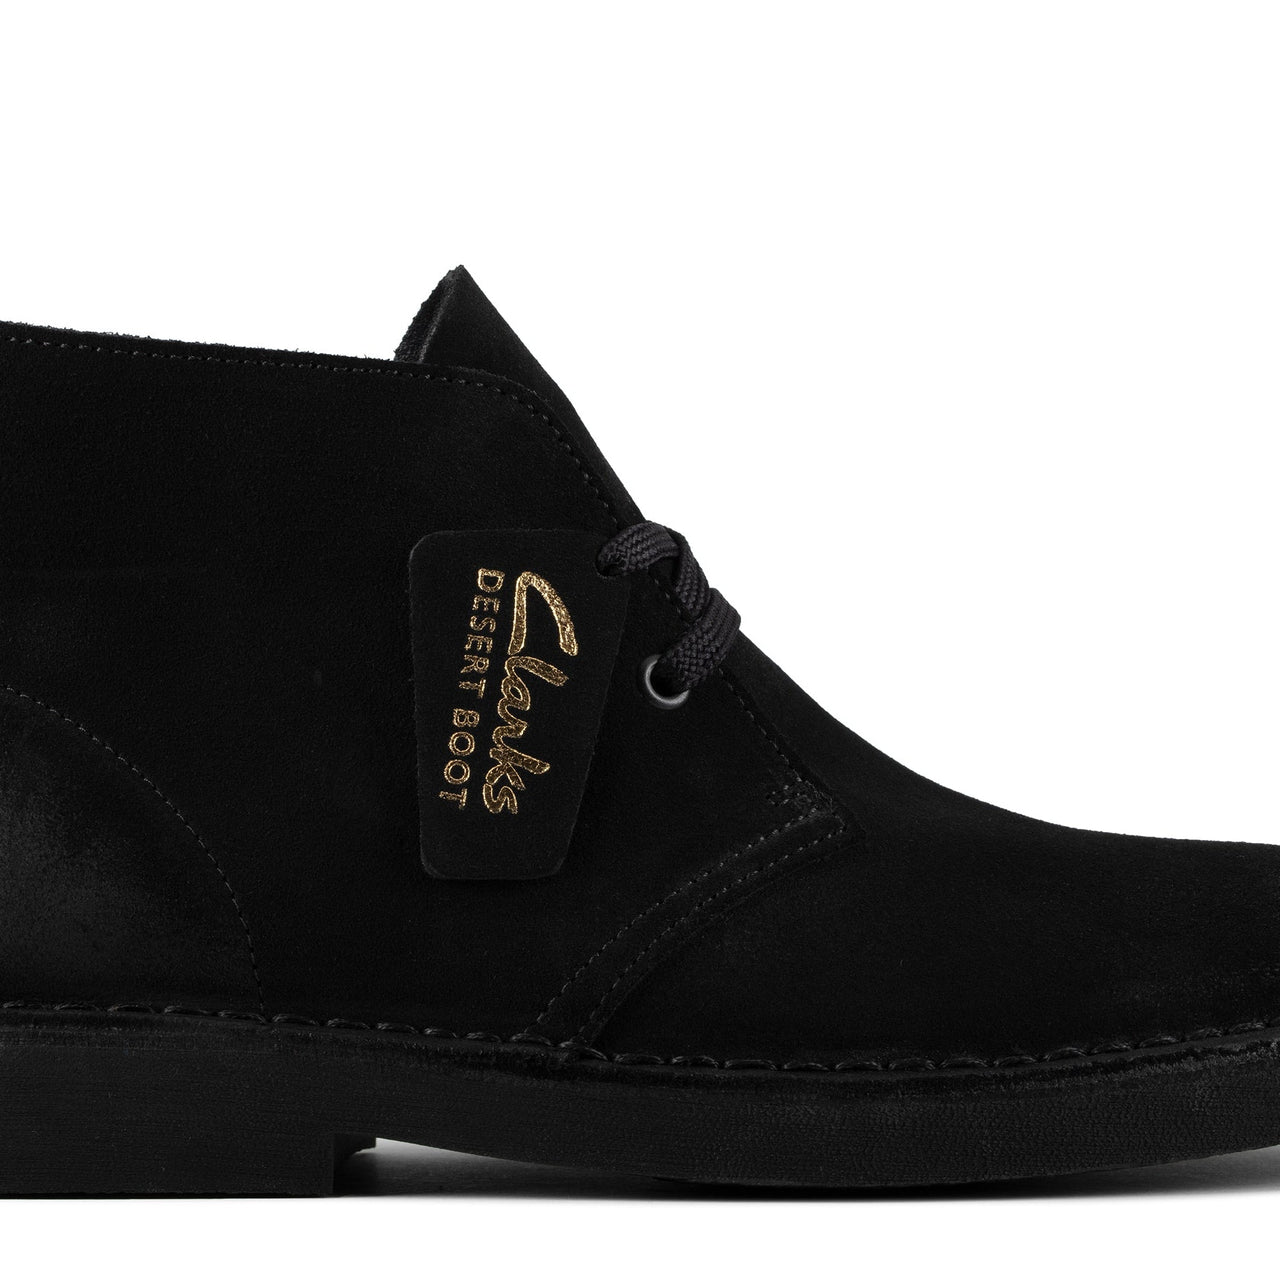  Clarks Womens Desert Boot 2 featuring a comfortable and supportive design